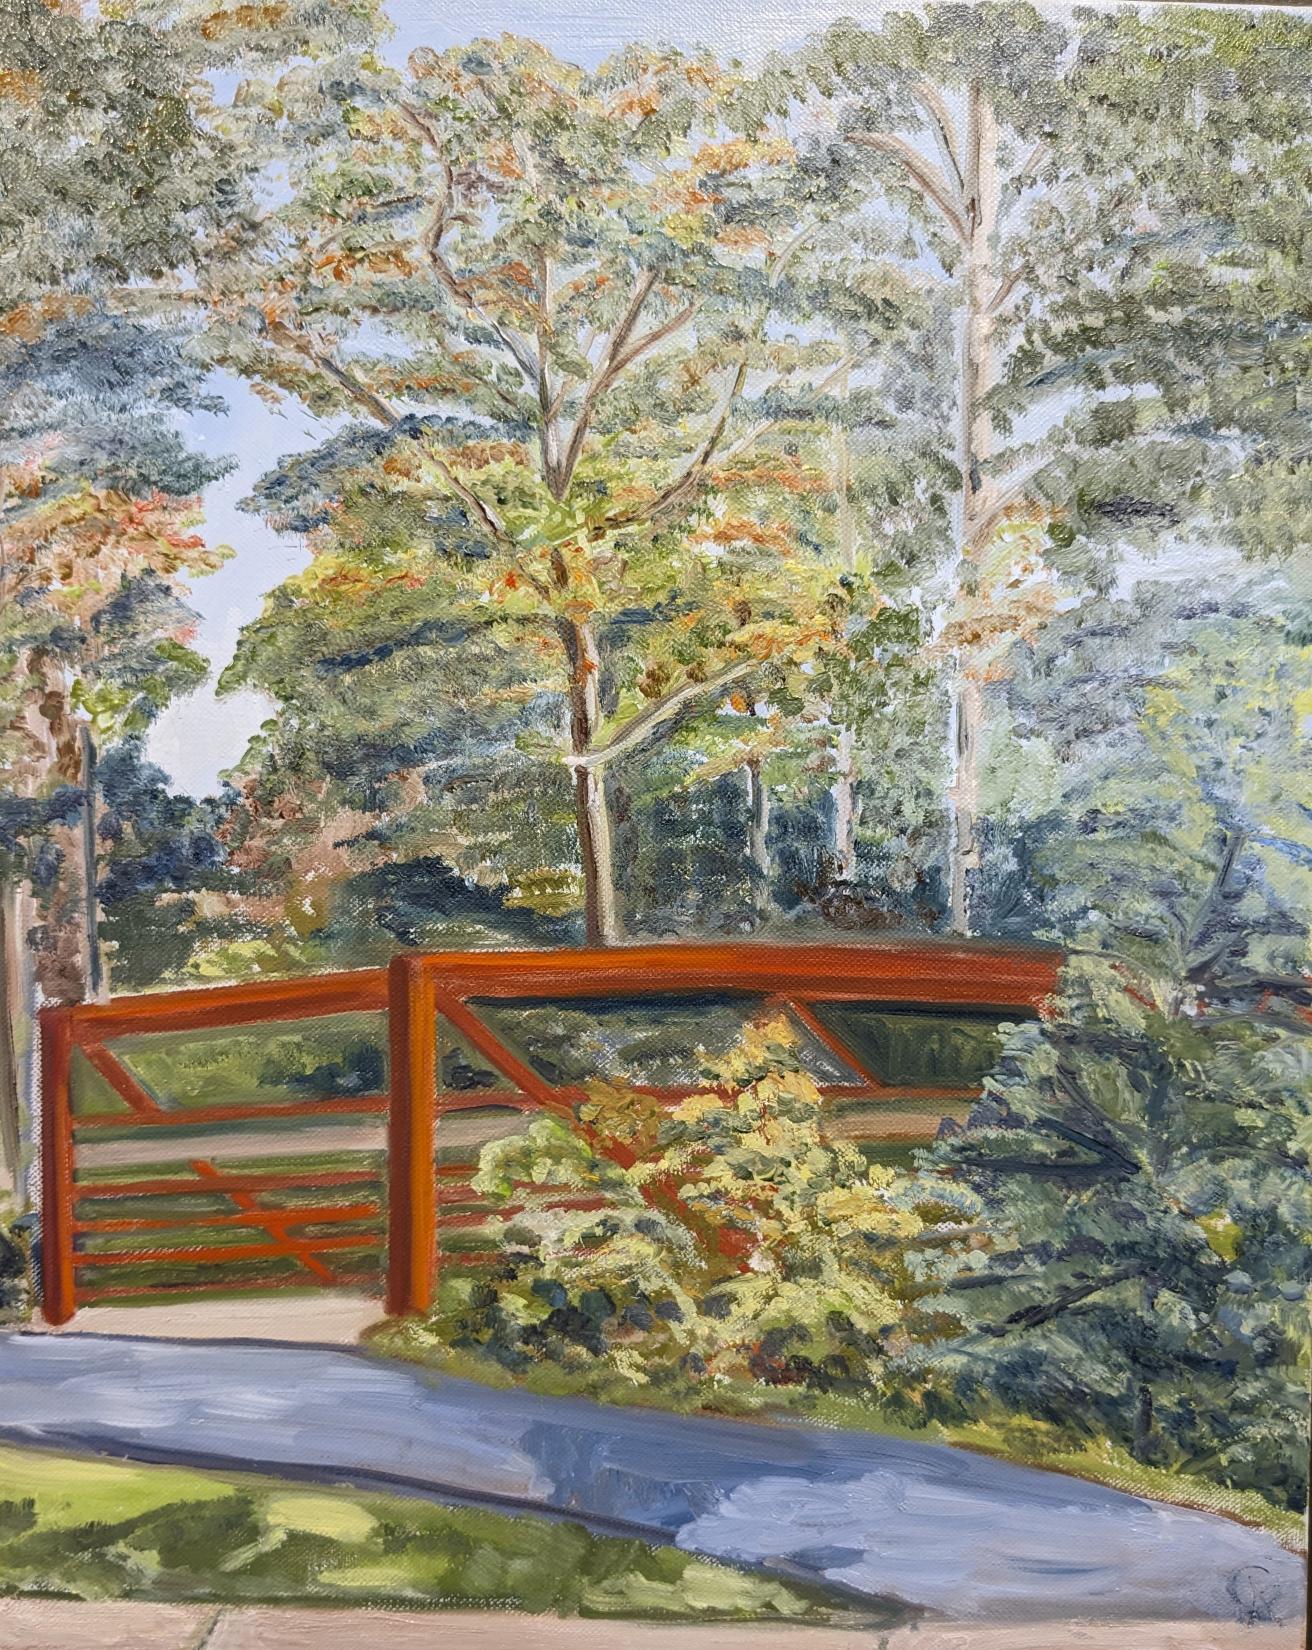 A plein air painting by Kathryn Gabig of a pedestrian bridge and trees next to the Karl Stirner Arts Trail in Easton, Pennsylvania